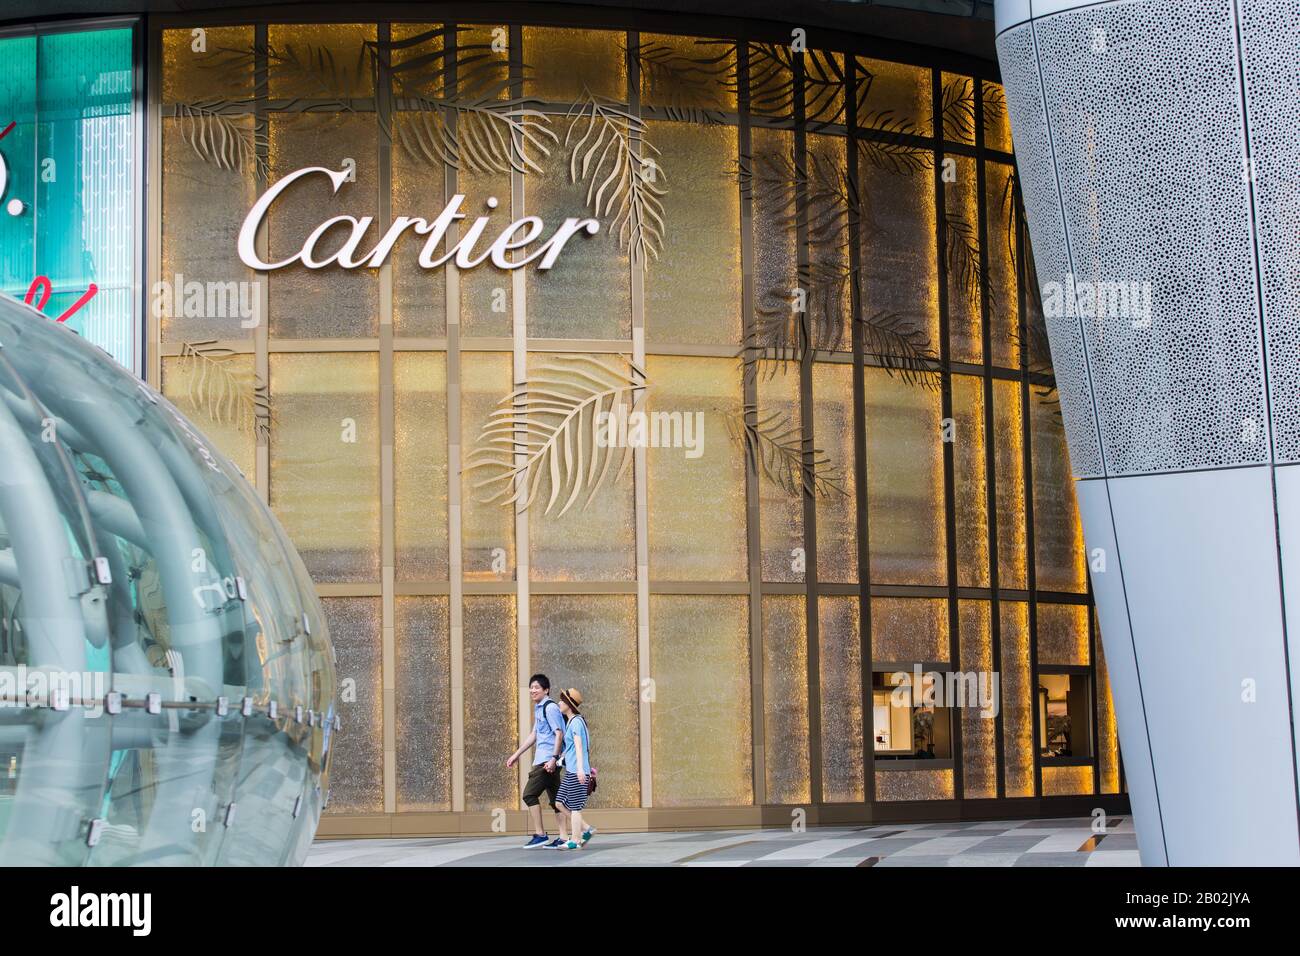 cartier in singapore